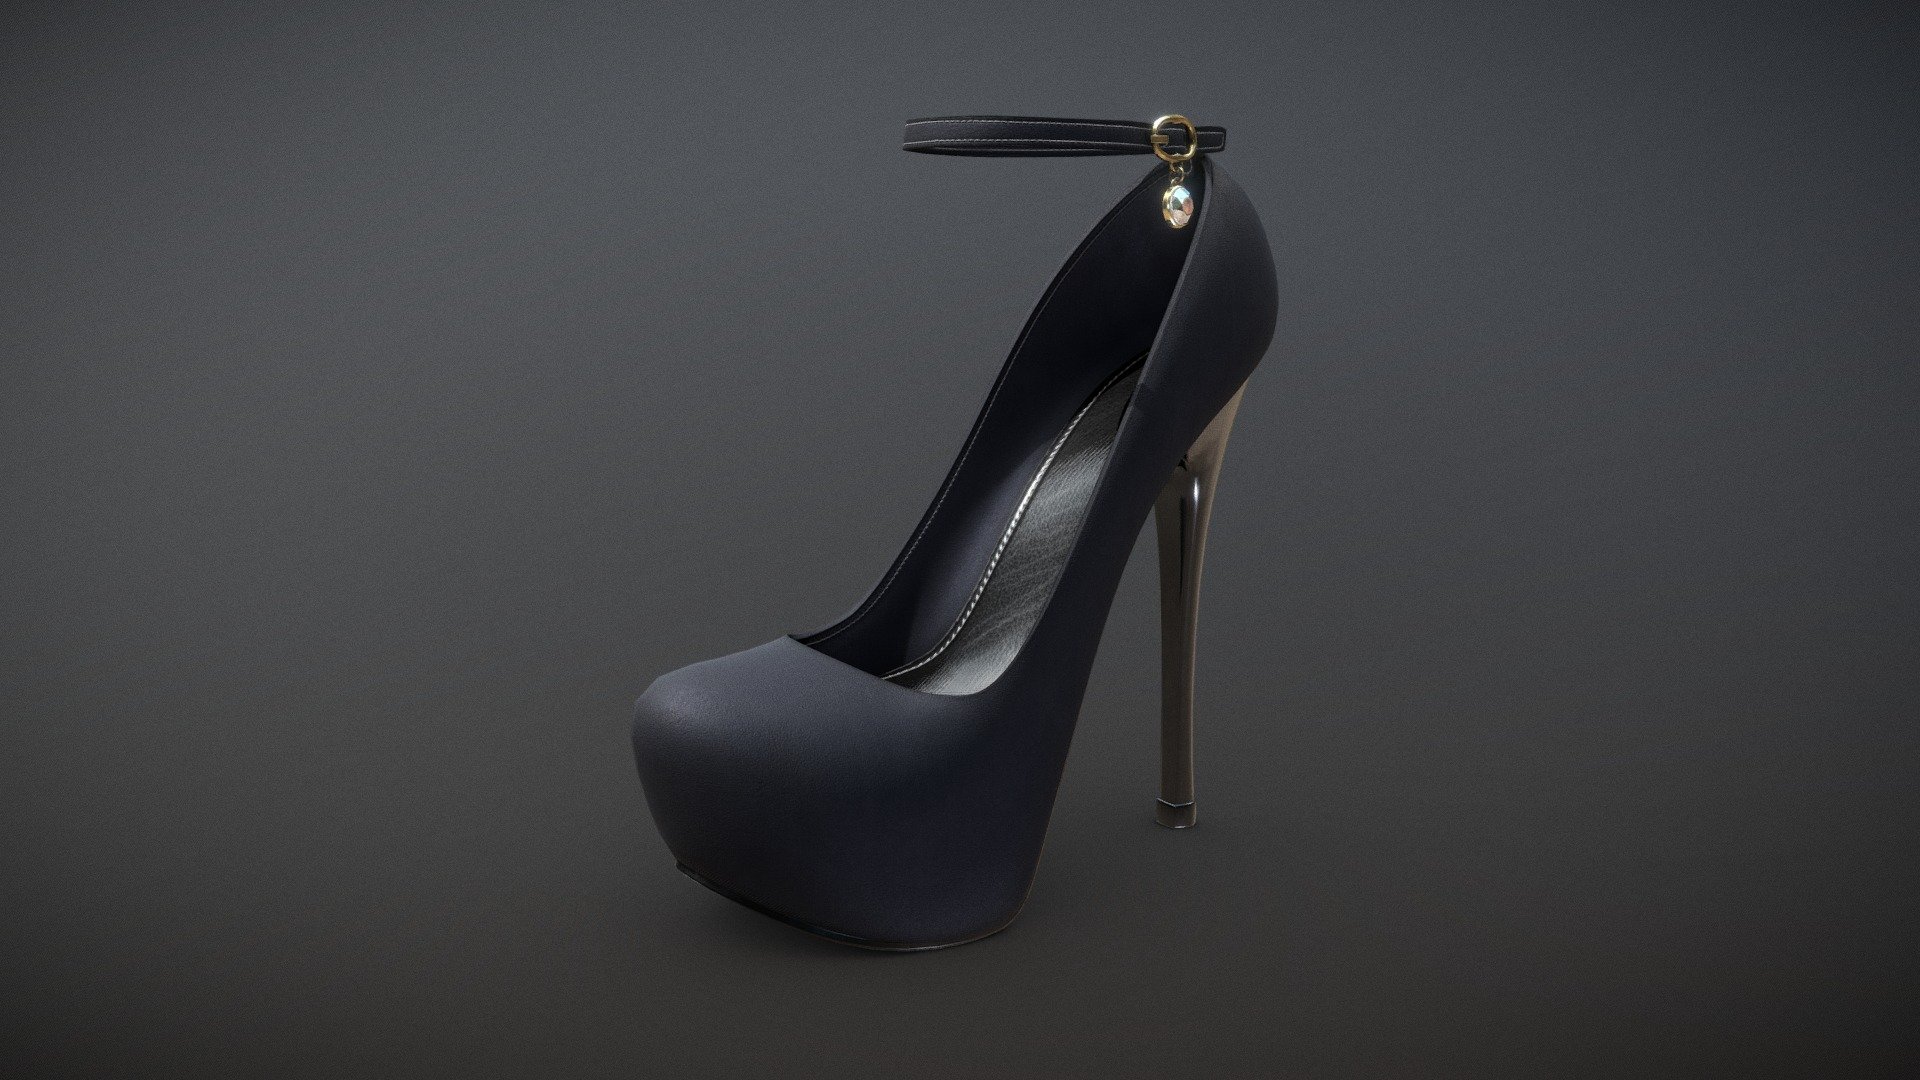 Stilettos High Heels Platform Shoes 2

Game and production ready, polycount optimized for quality, ideal for high quality Characters and Close-Ups
Internal parts modeled and textured, ideal for customization or animation
Foot model not included

Single UV space
PBR and UE4 4k Textures
Low Poly has 3.6k quads
FBX, OBJ, ZTL

Includes 2 color variants:
Black
Pink - Stilettos High Heels Platform Shoes 2 - Buy Royalty Free 3D model by Feds452 3d model